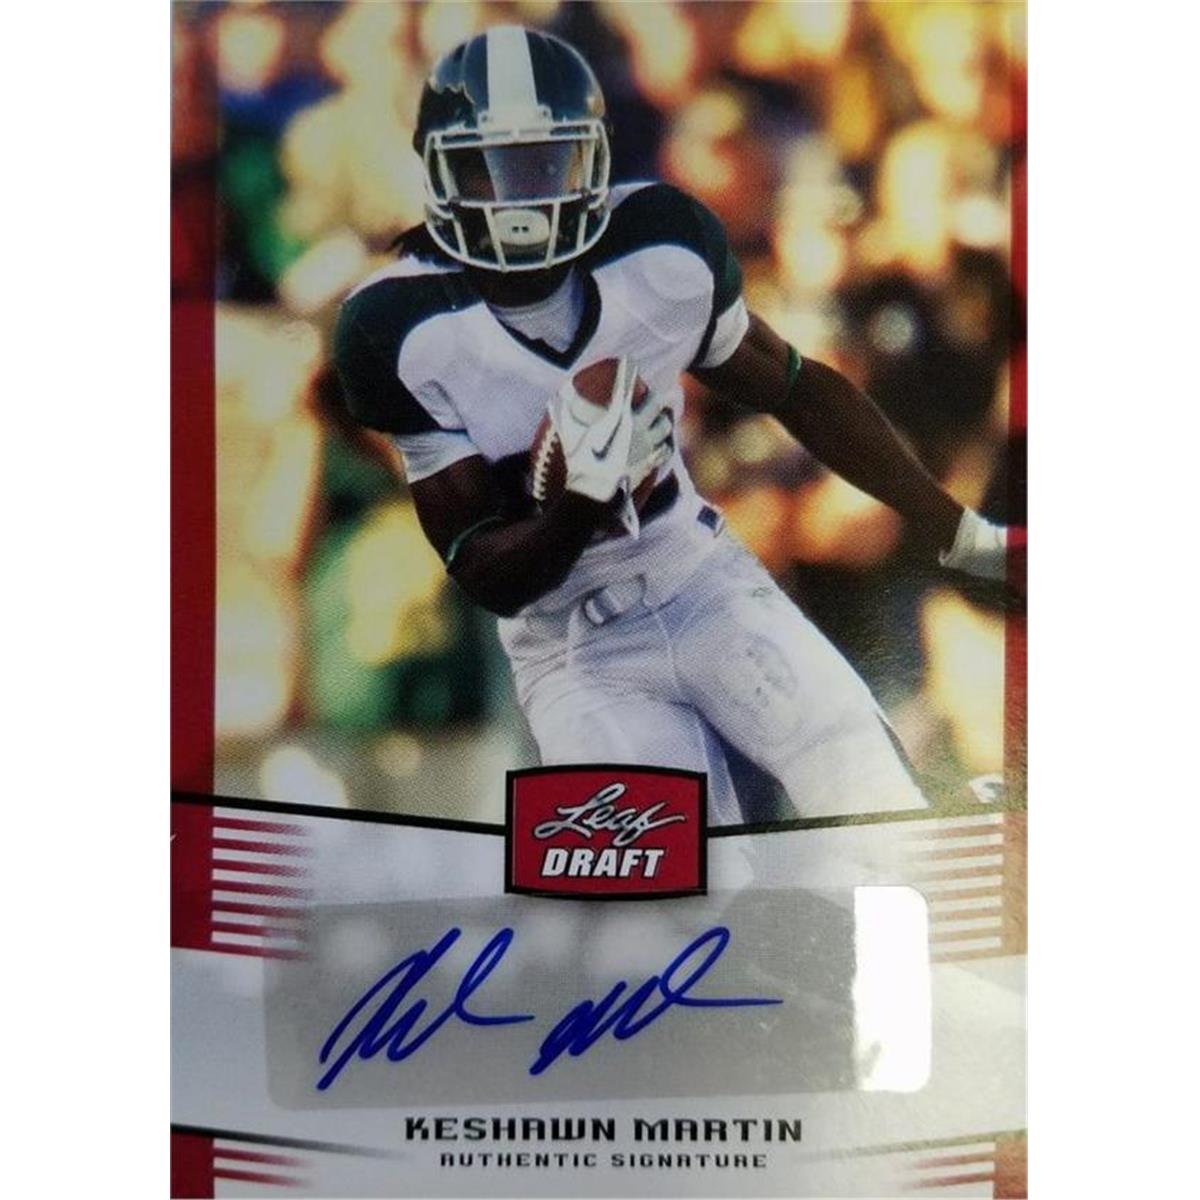 Picture of Autograph Warehouse 444600 Keshawn Martin Autographed Football Card 2012 Leaf Draft Rookie No. KM2 for Michigan State Spartans